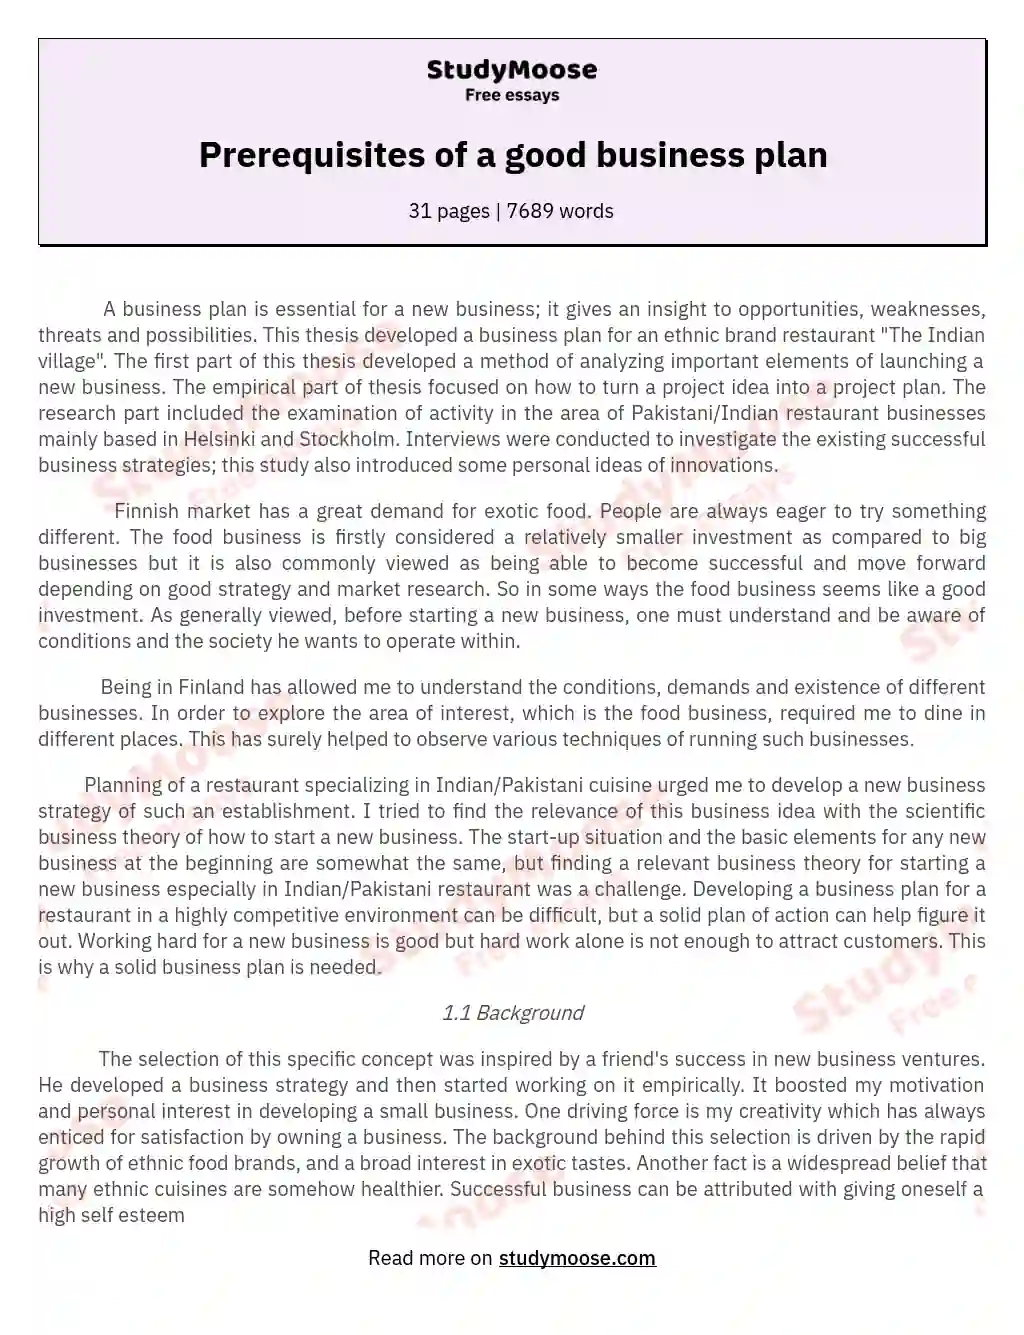 Prerequisites of a good business plan essay